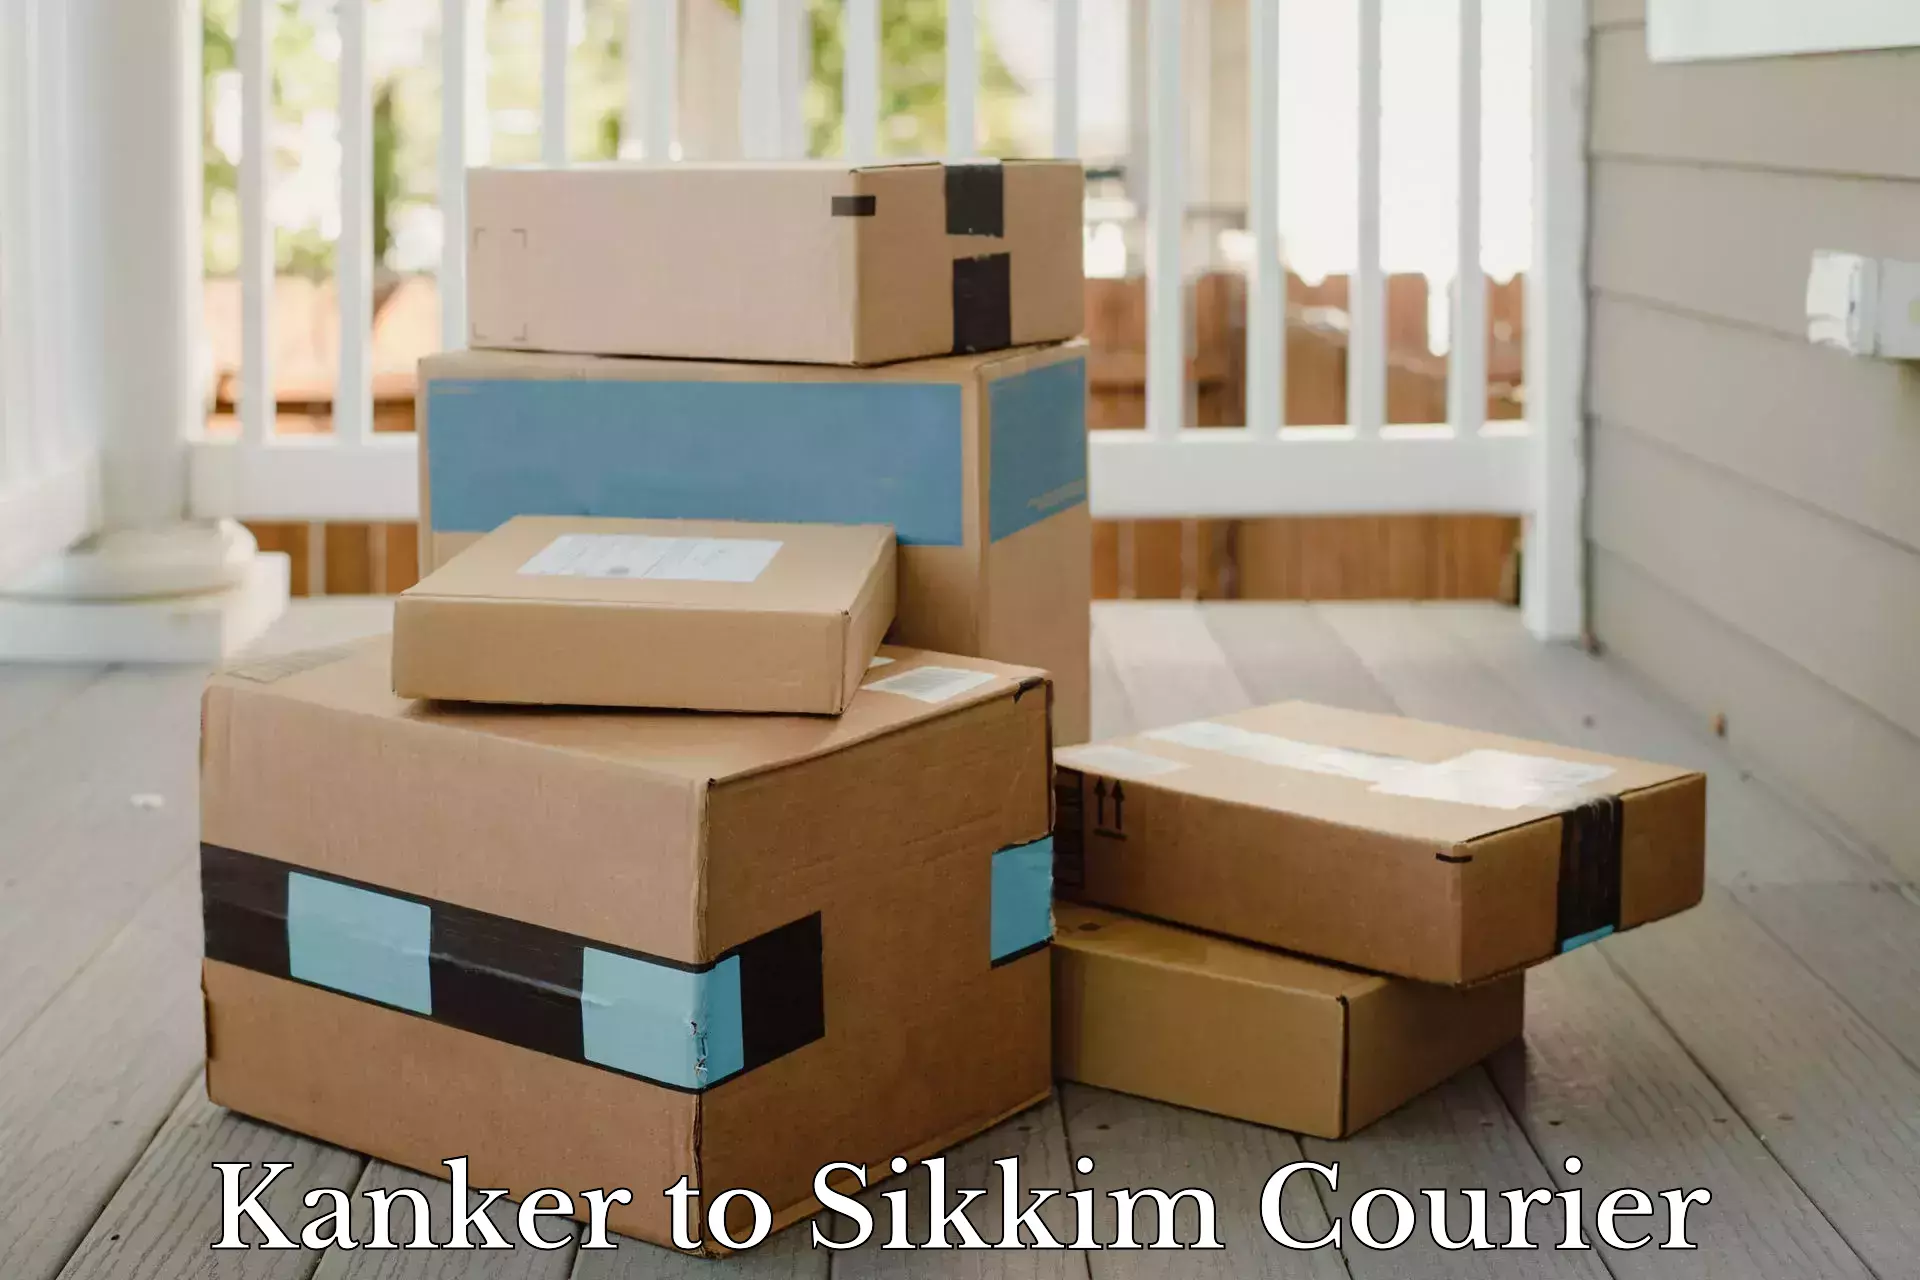 24-hour courier service Kanker to Sikkim